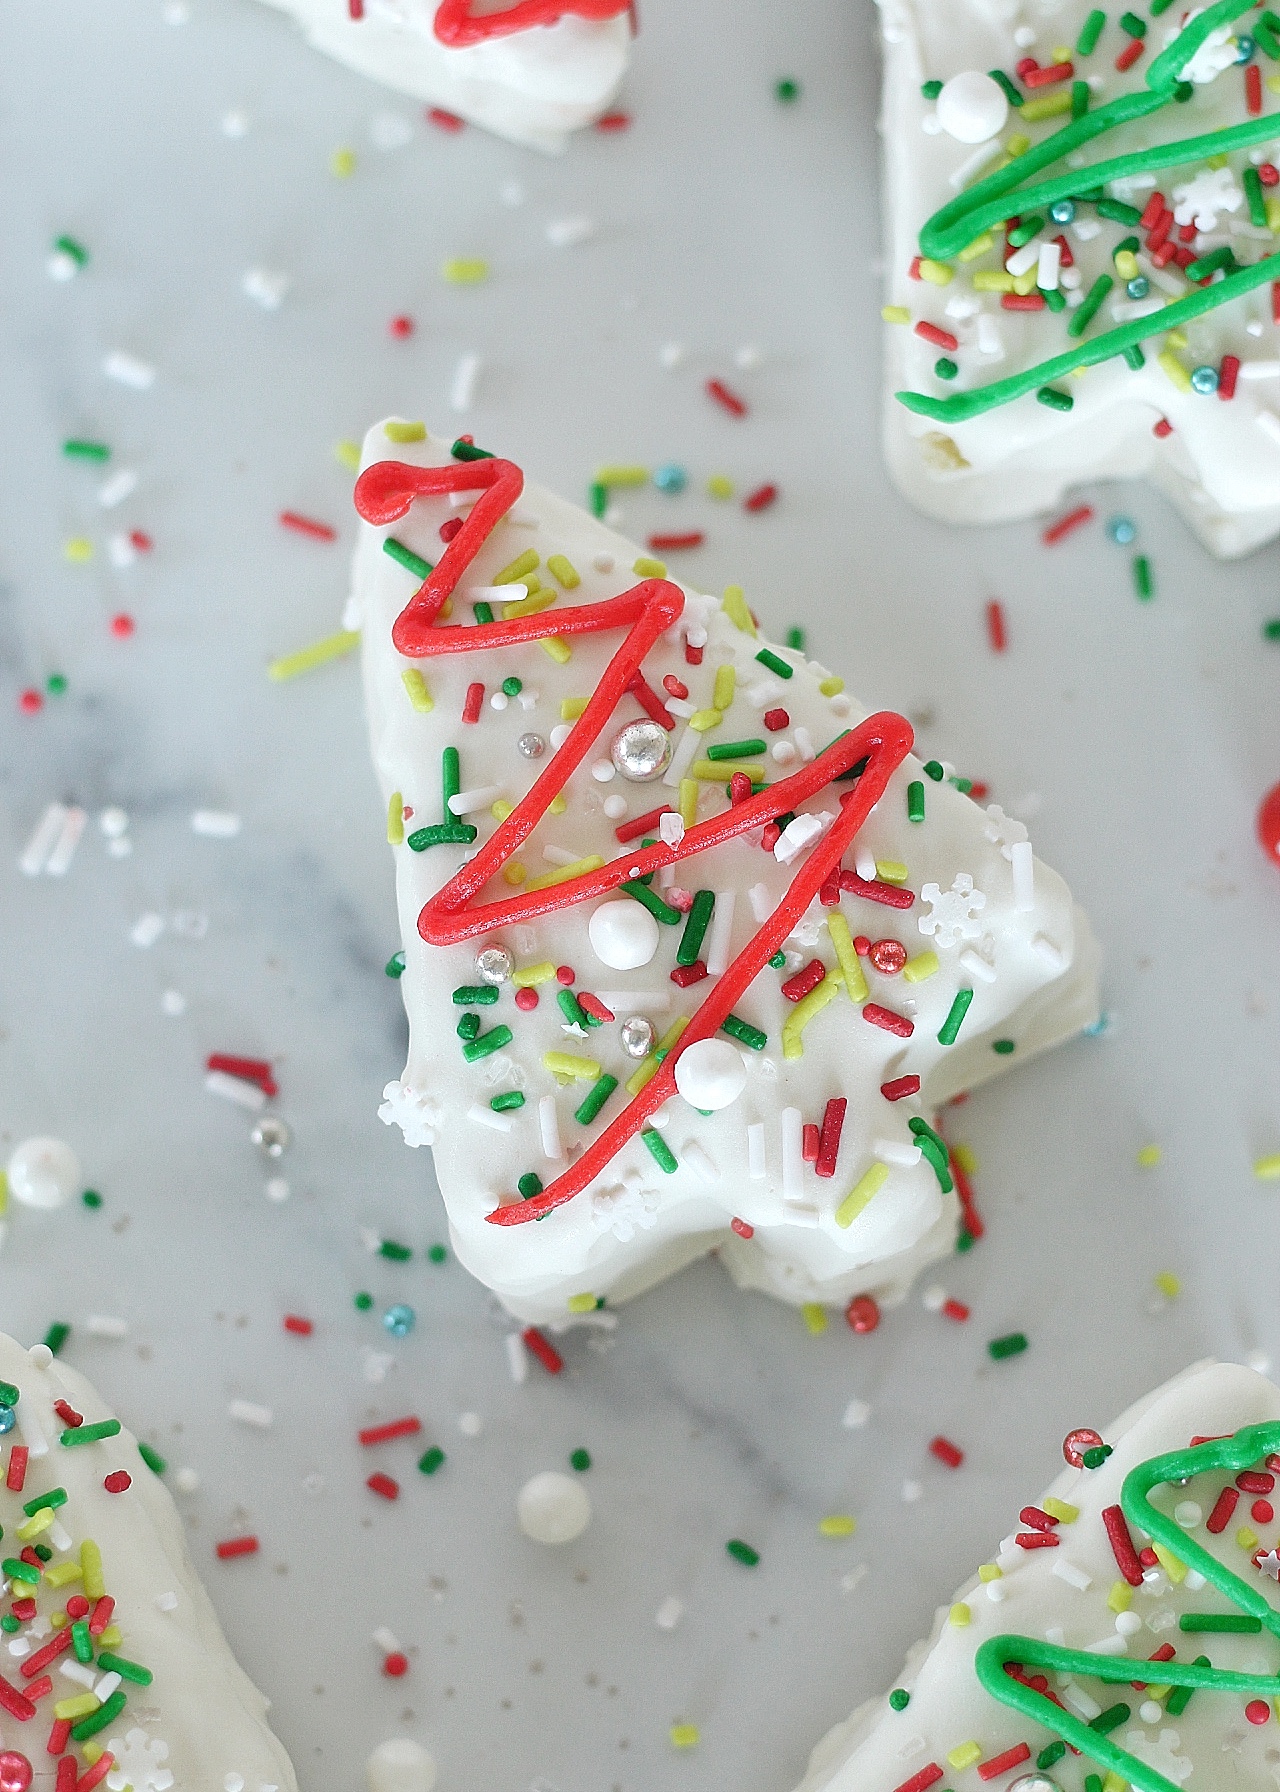 Christmas Tree Cakes with sprinkles on a plate.